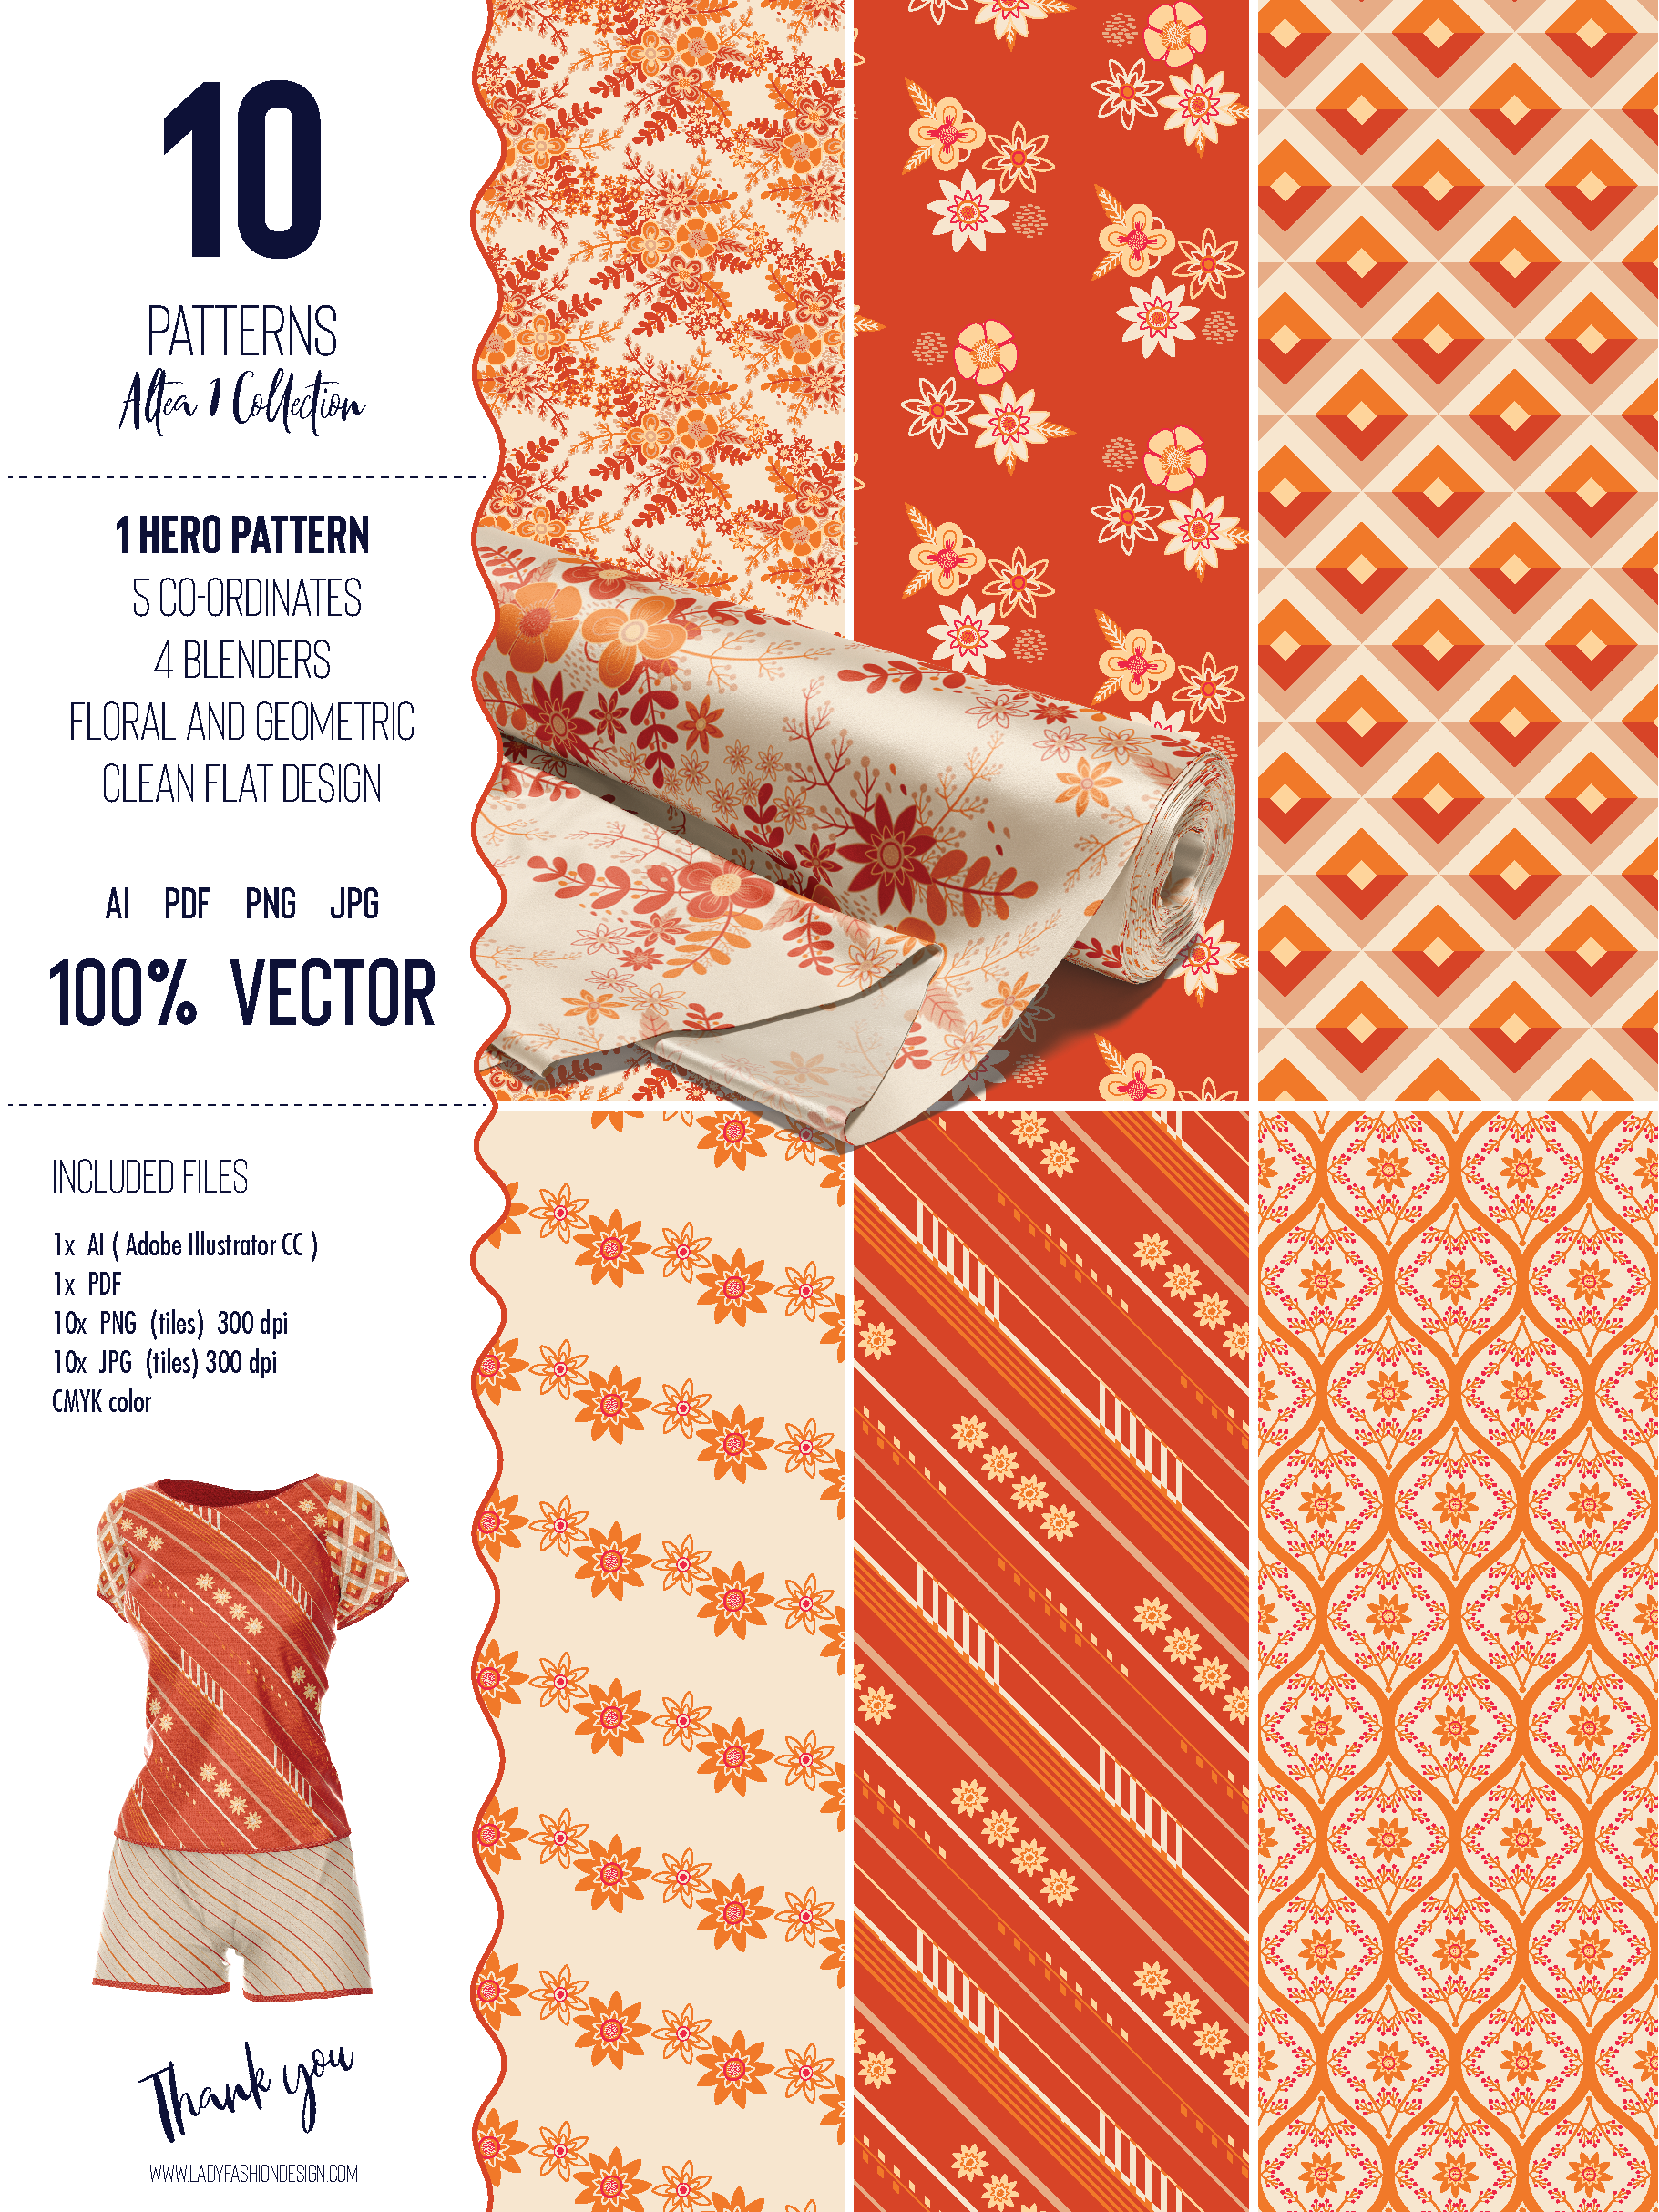 Altea – vector pattern collection